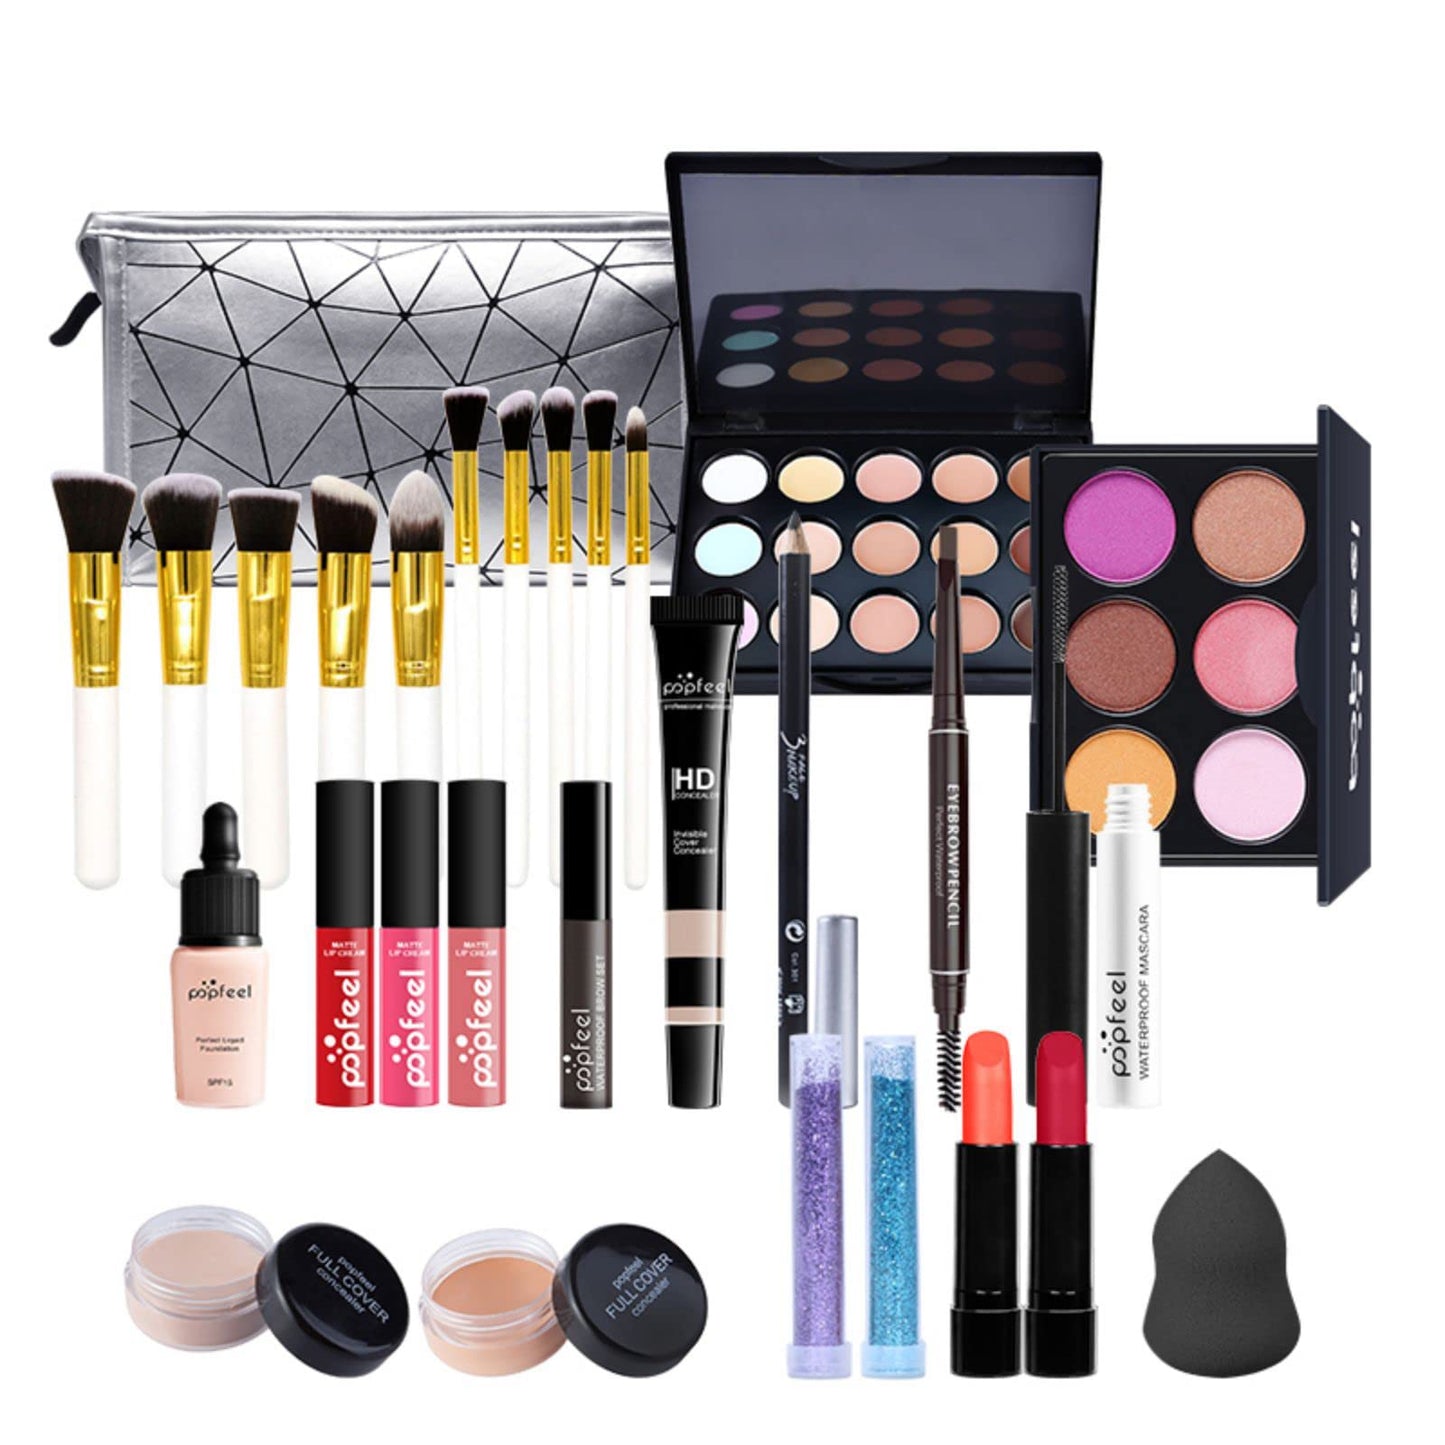 Pure Vie All-in-One Holiday Gift Surprise Makeup Set Essential Starter Bundle Include Eyeshadow Palette Lipstick Concealer Blush Mascara Eyeliner Face Powder Lipgloss Brush - Full Makeup Kit for Women